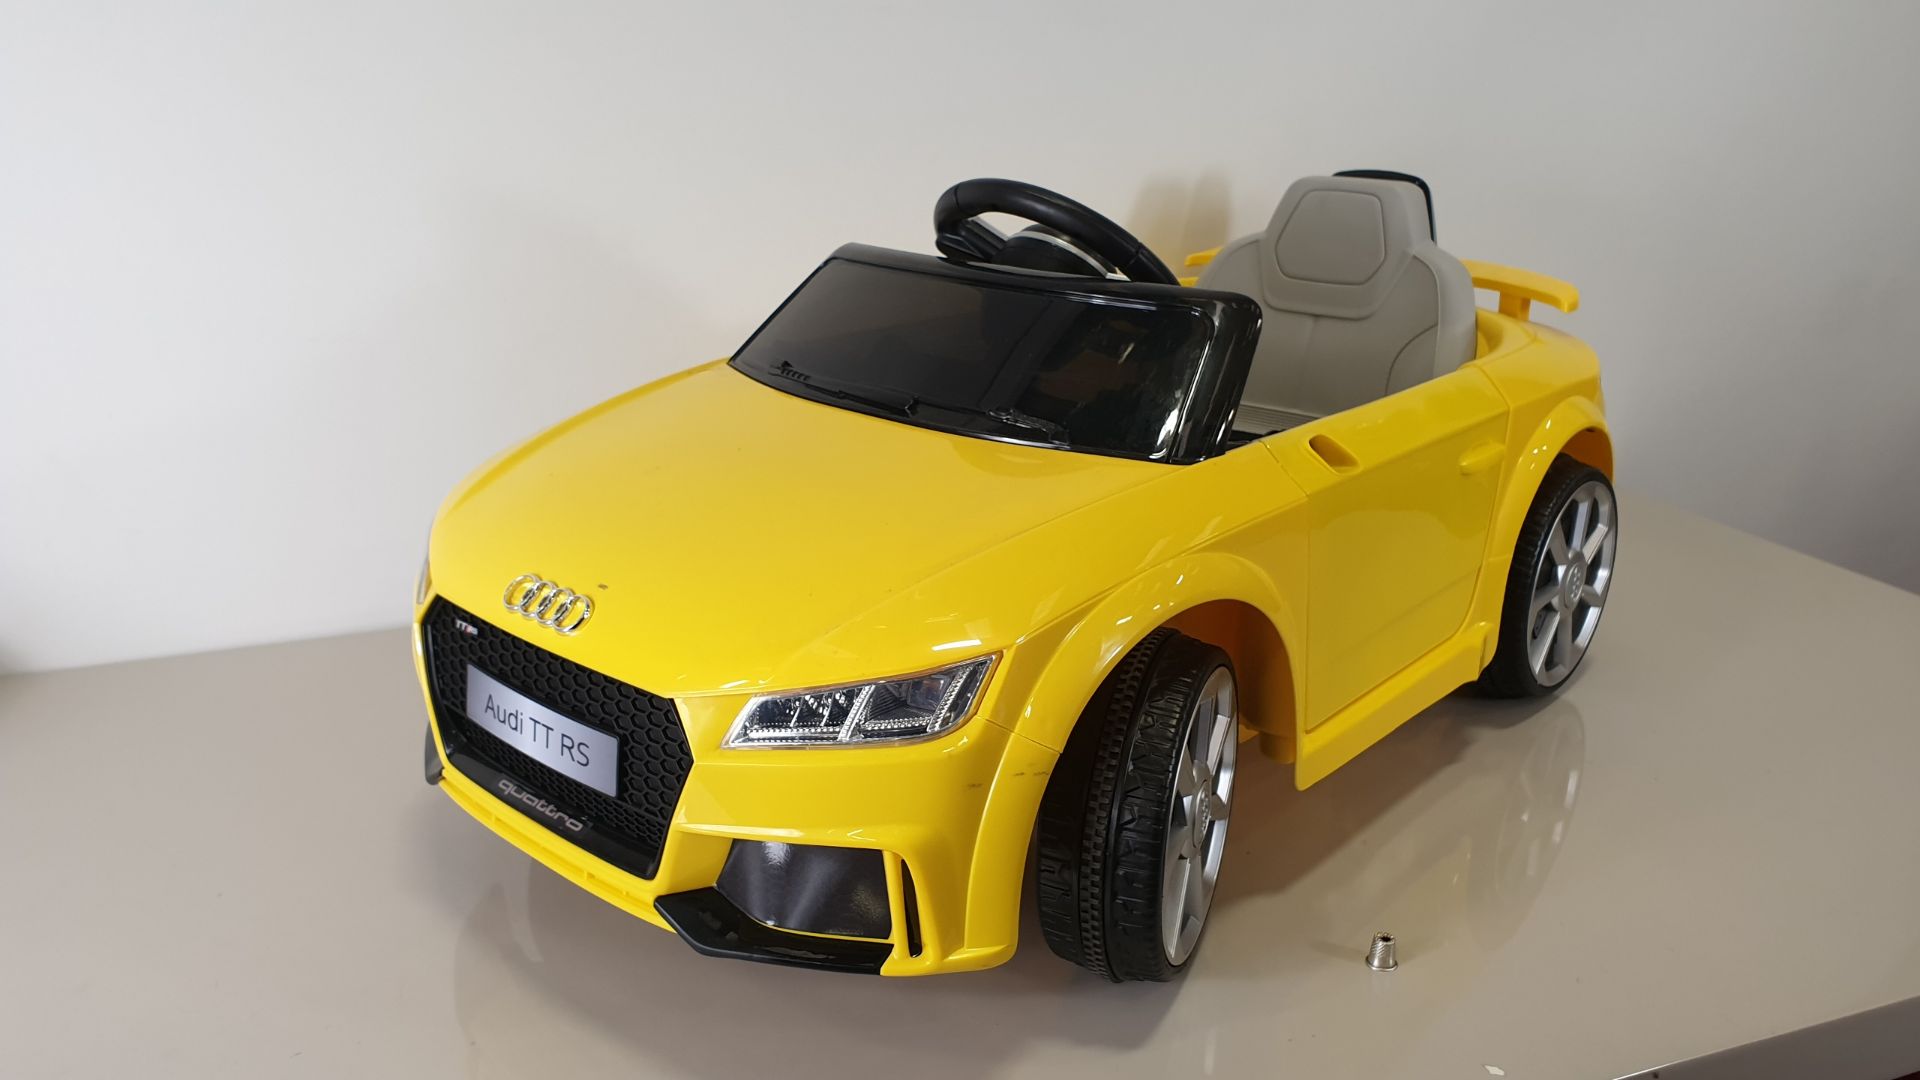 BRAND NEW BOXED AUDI TT 6V CHILDREN'S BATTERY OPERATED RECHARGEABLE ELECTRIC RIDE ON TOY CAR WITH